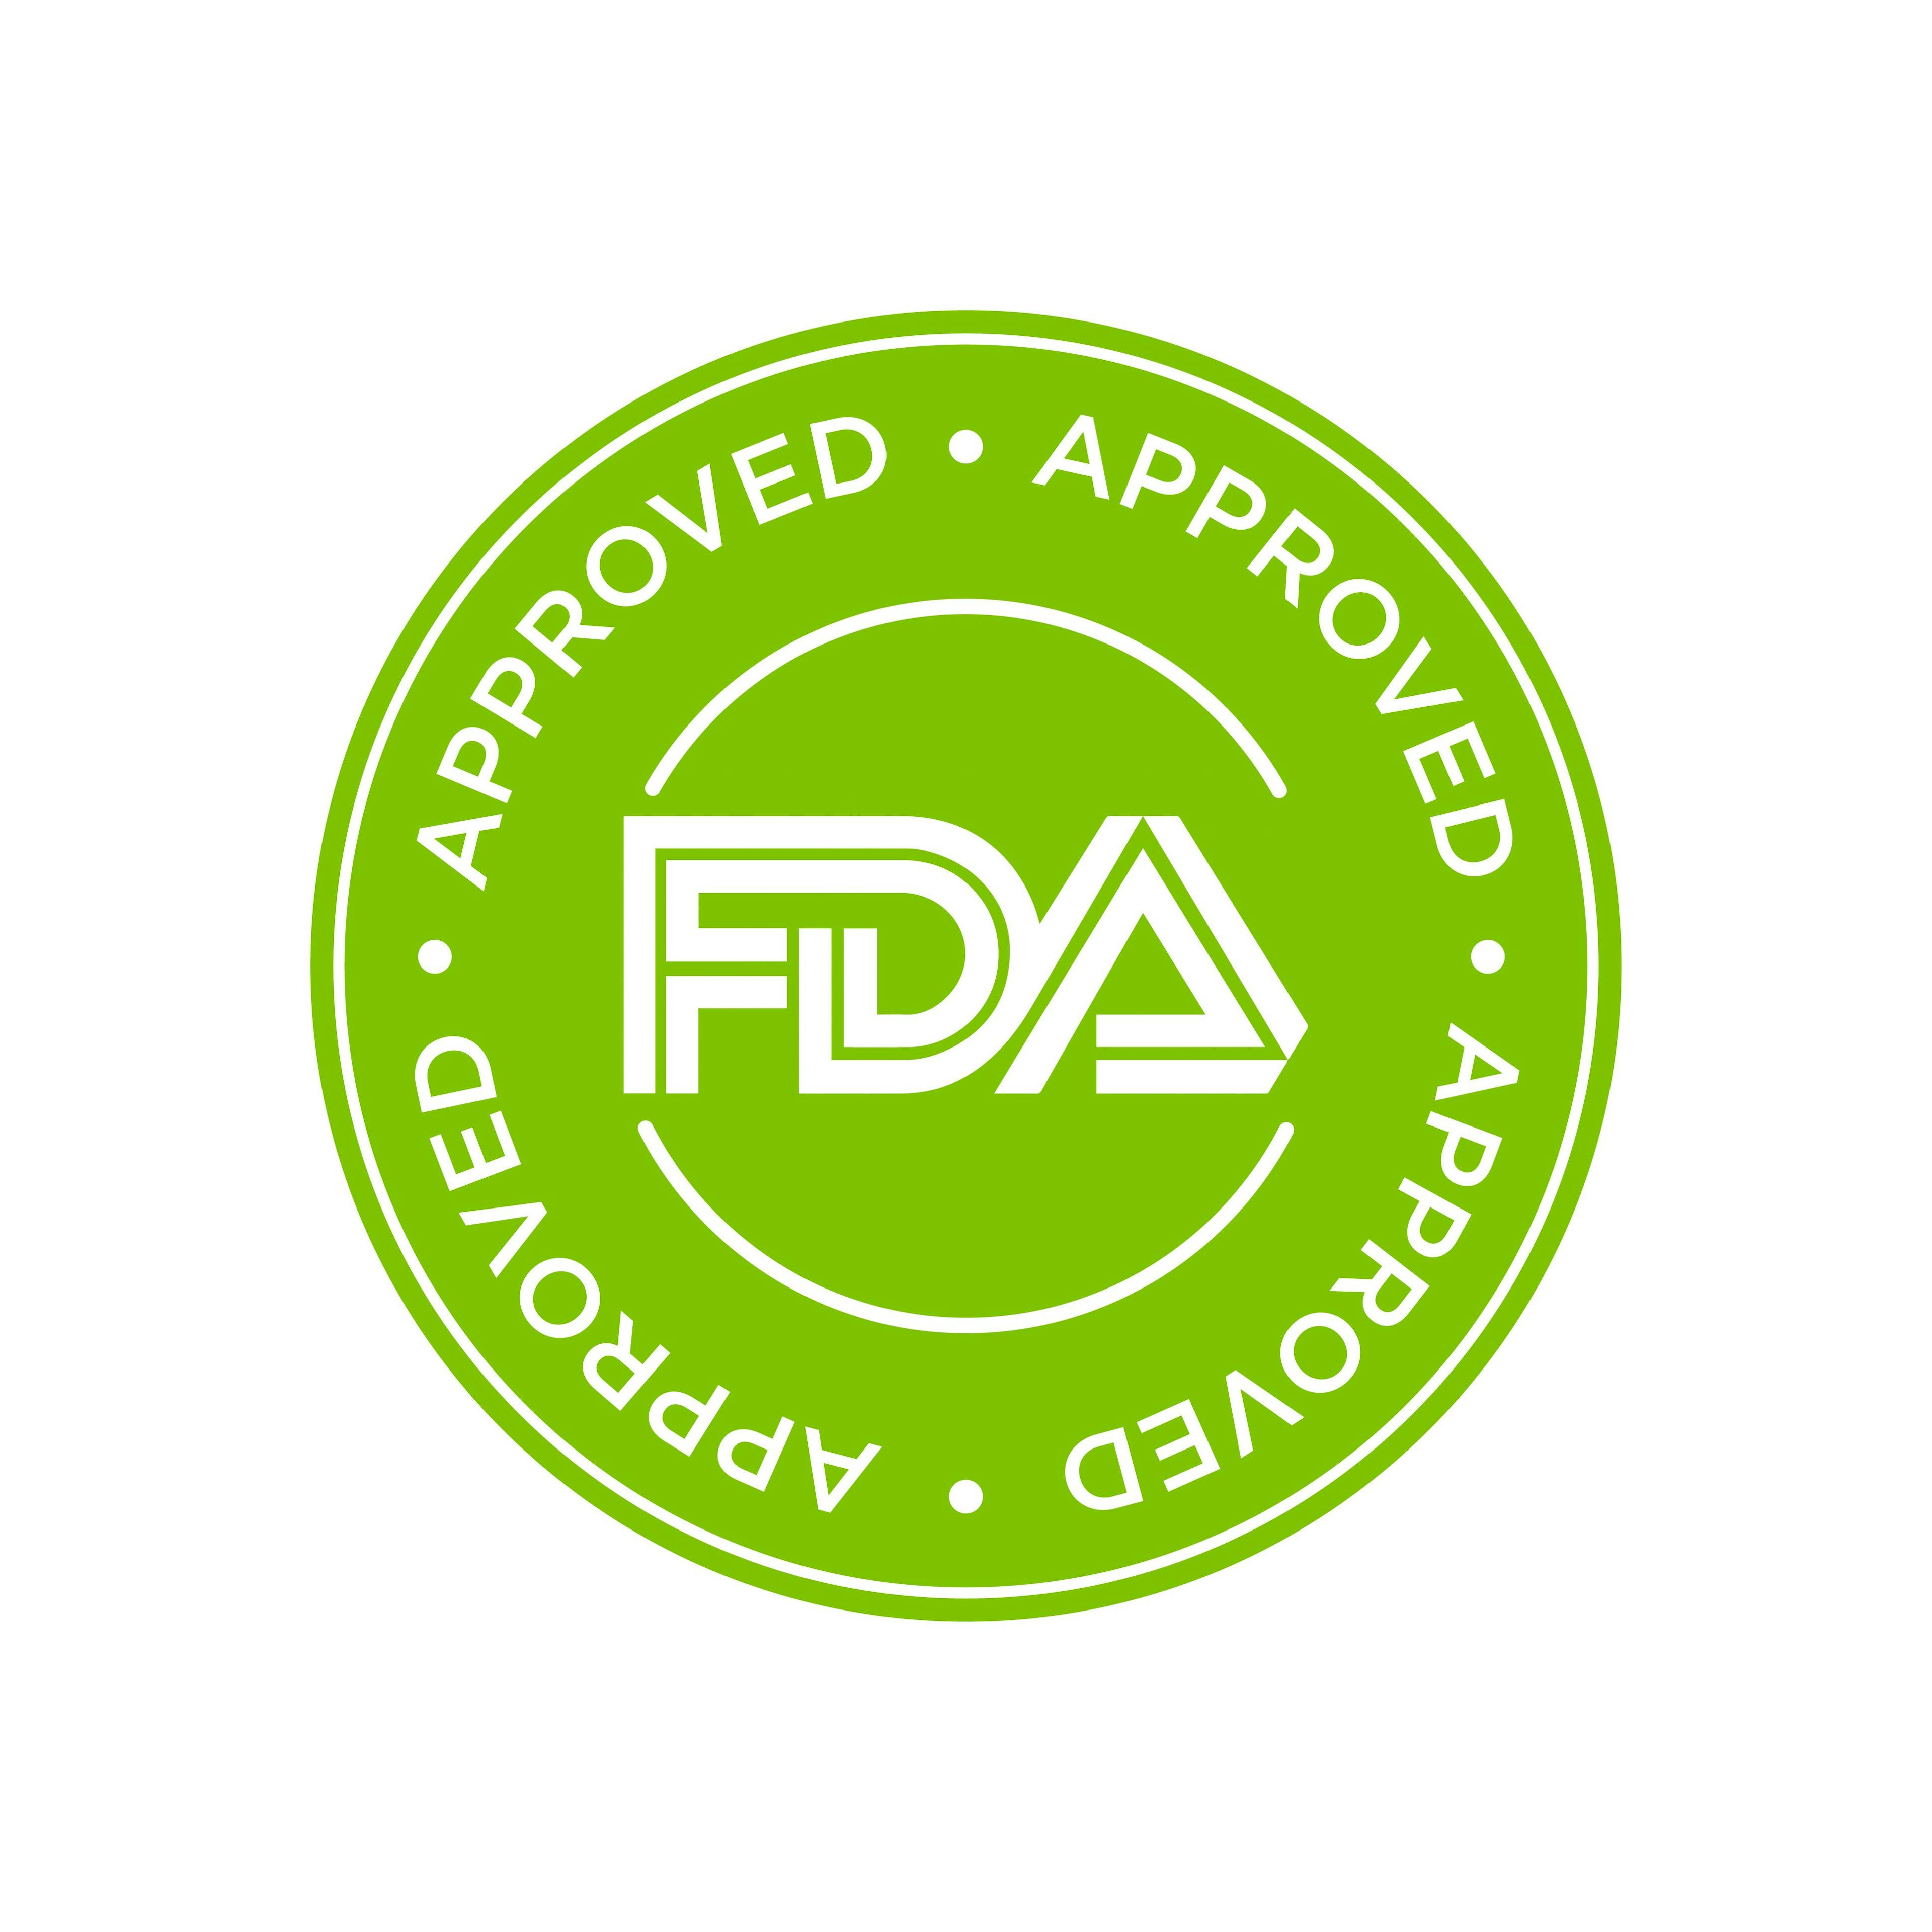 FDA Approves DaxibotulinumtoxinA for Injection for Glabellar Lines 